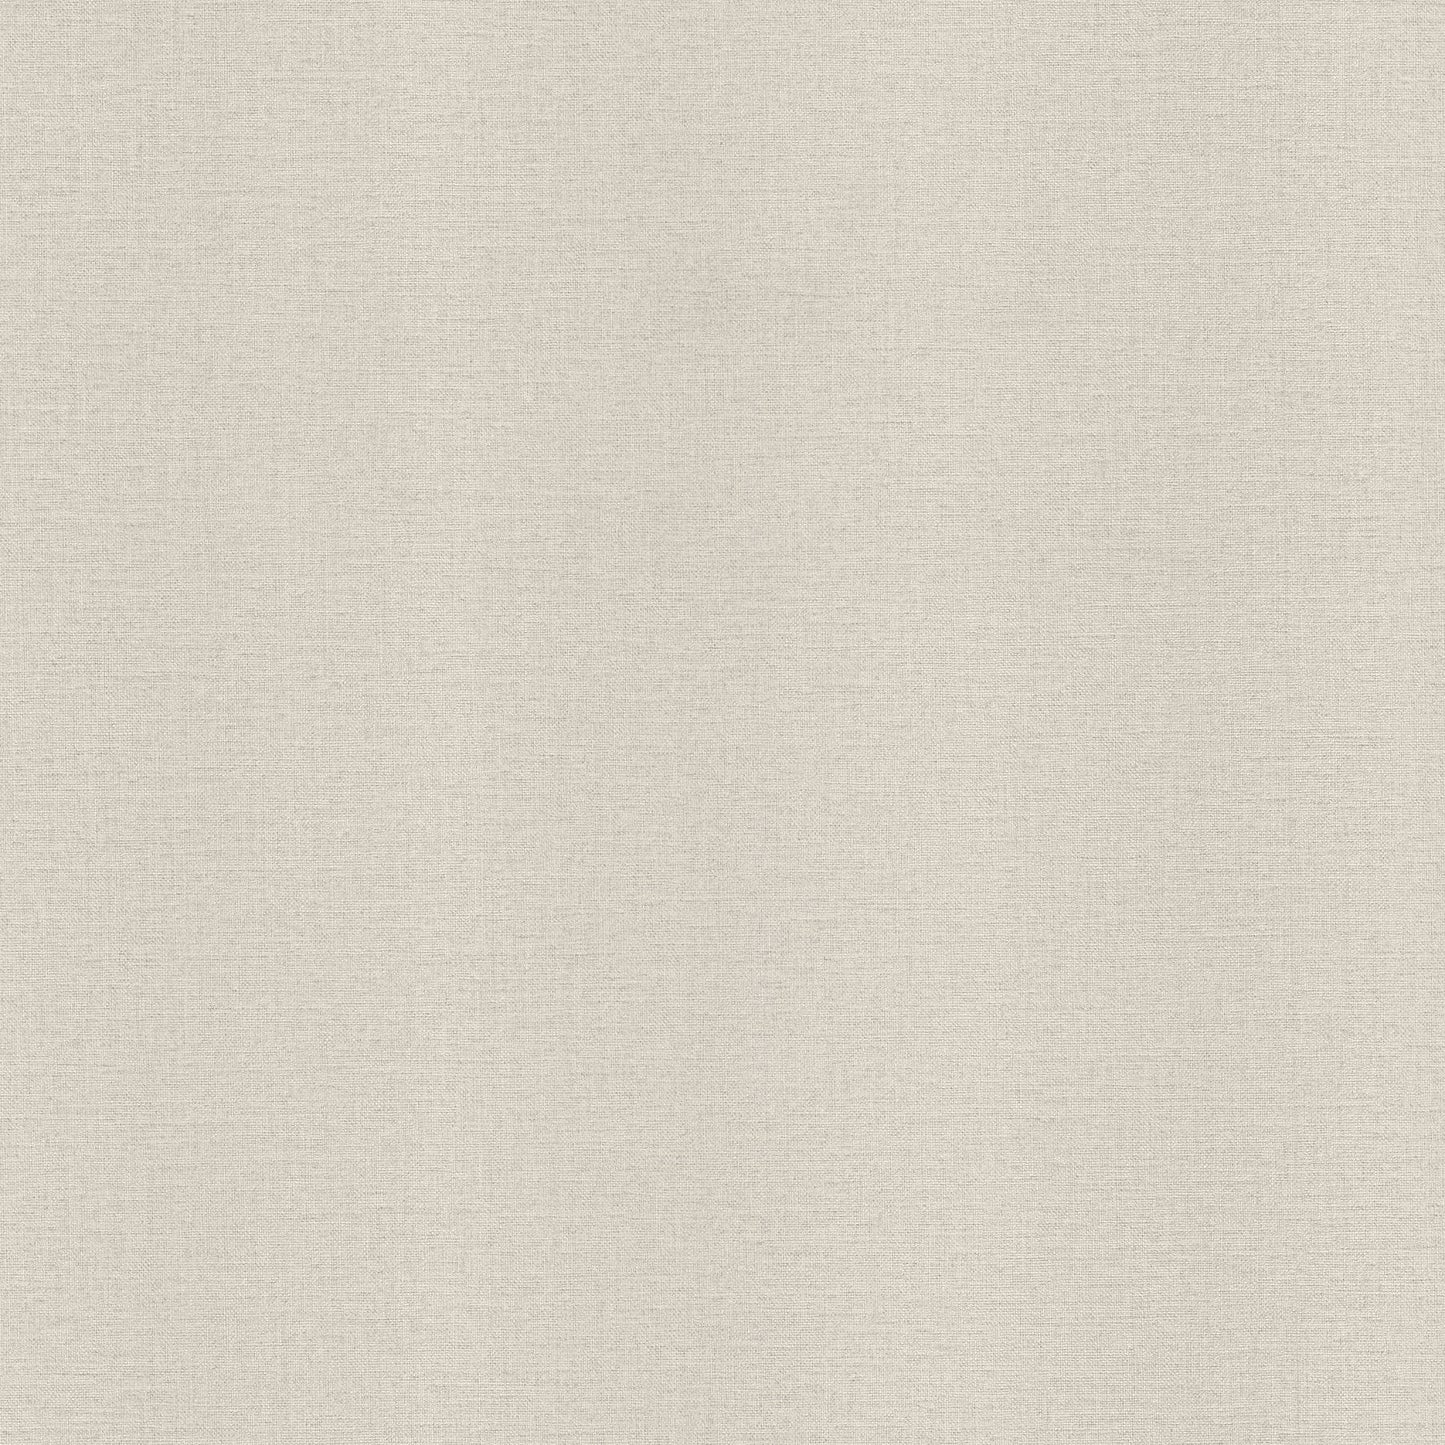 Save 2773-448610 Neutral Black White Greys Fabric Textures Wallpaper by Advantage